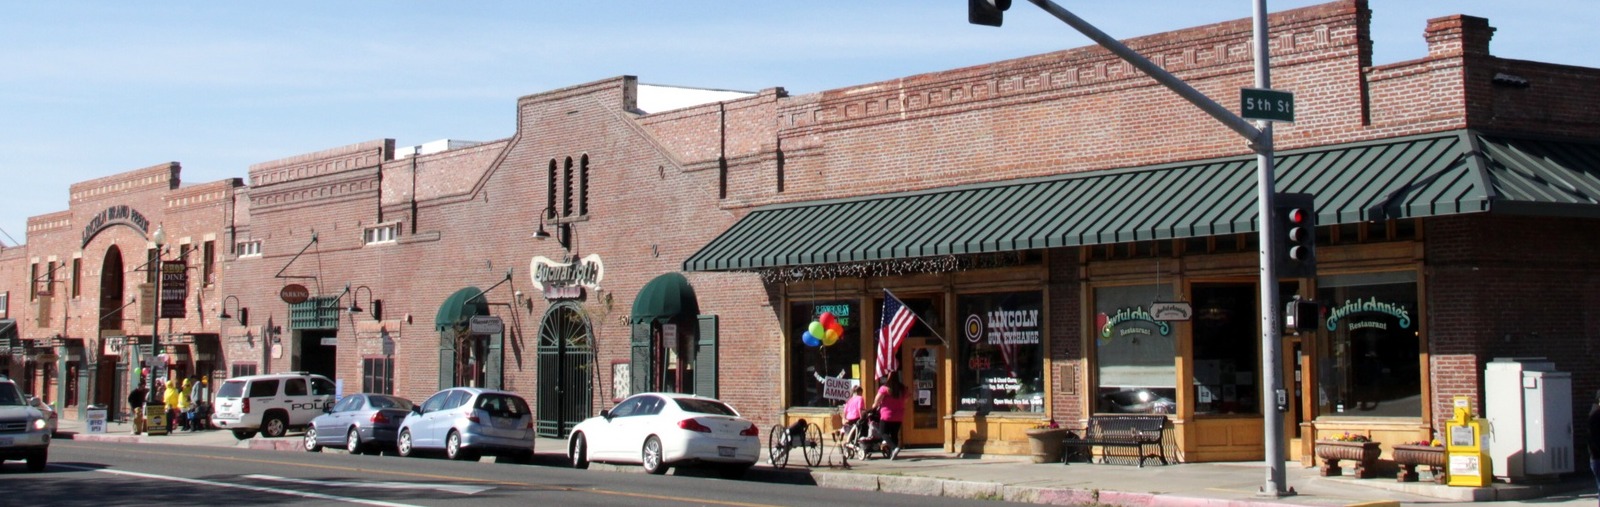 Image of Lincoln Brand Feeds brick building in downtown Lincoln.